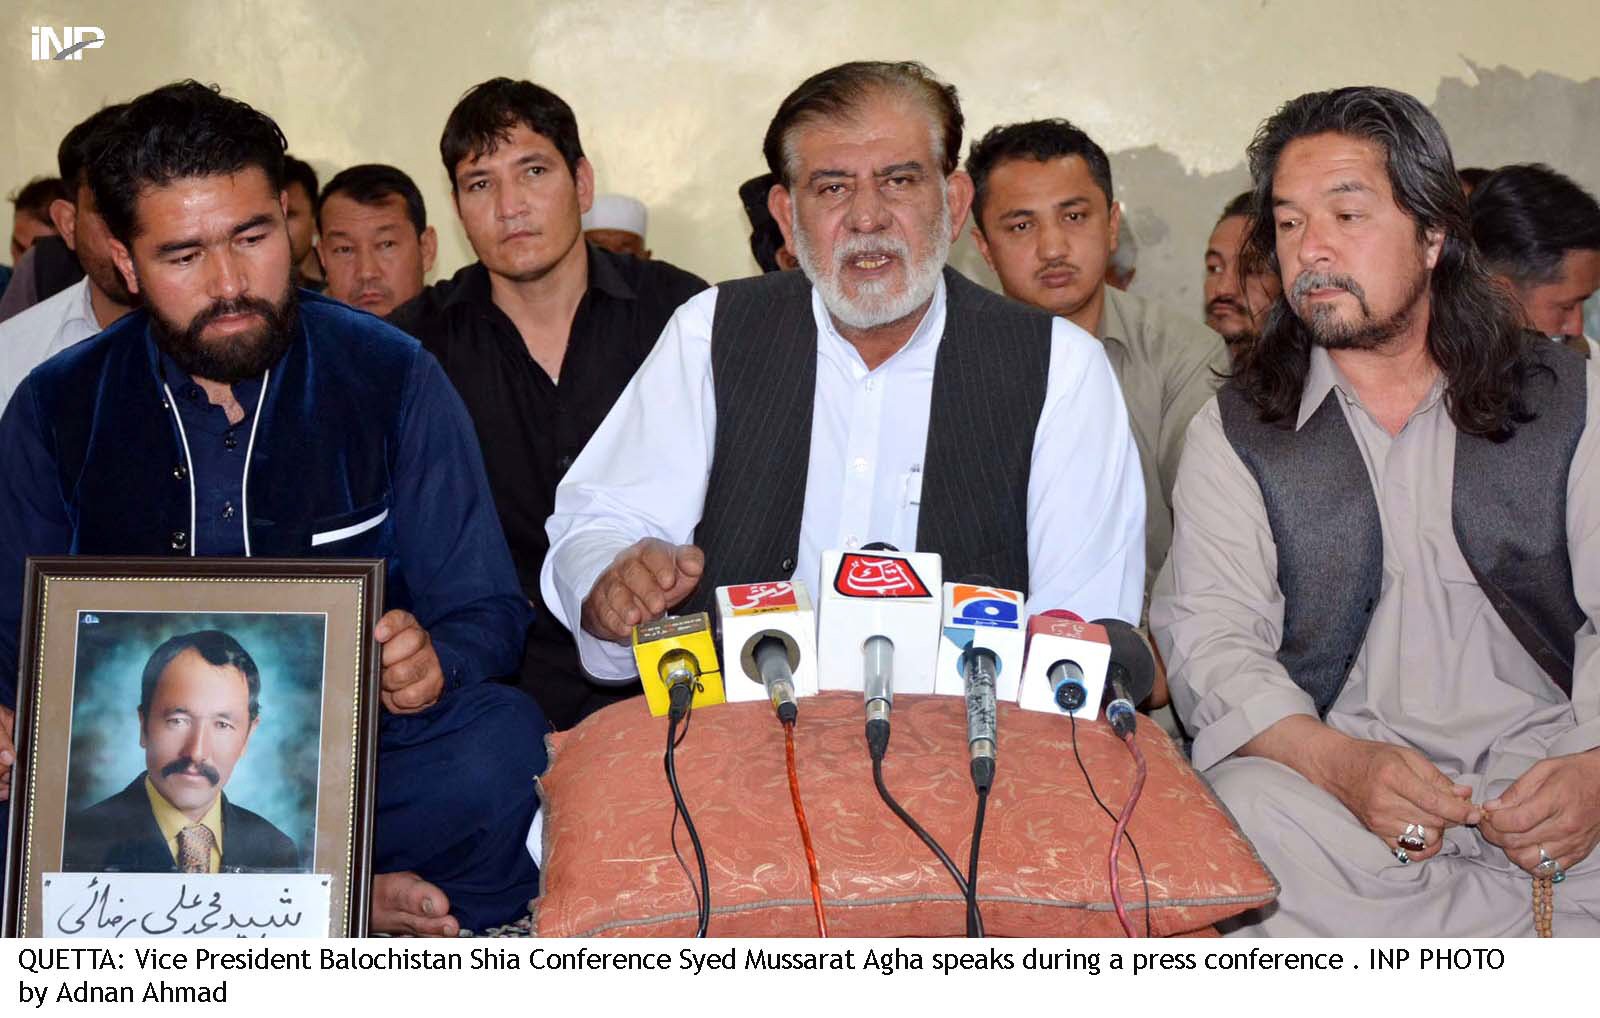 leaders of balochistan shia conference addressing the media photo inp